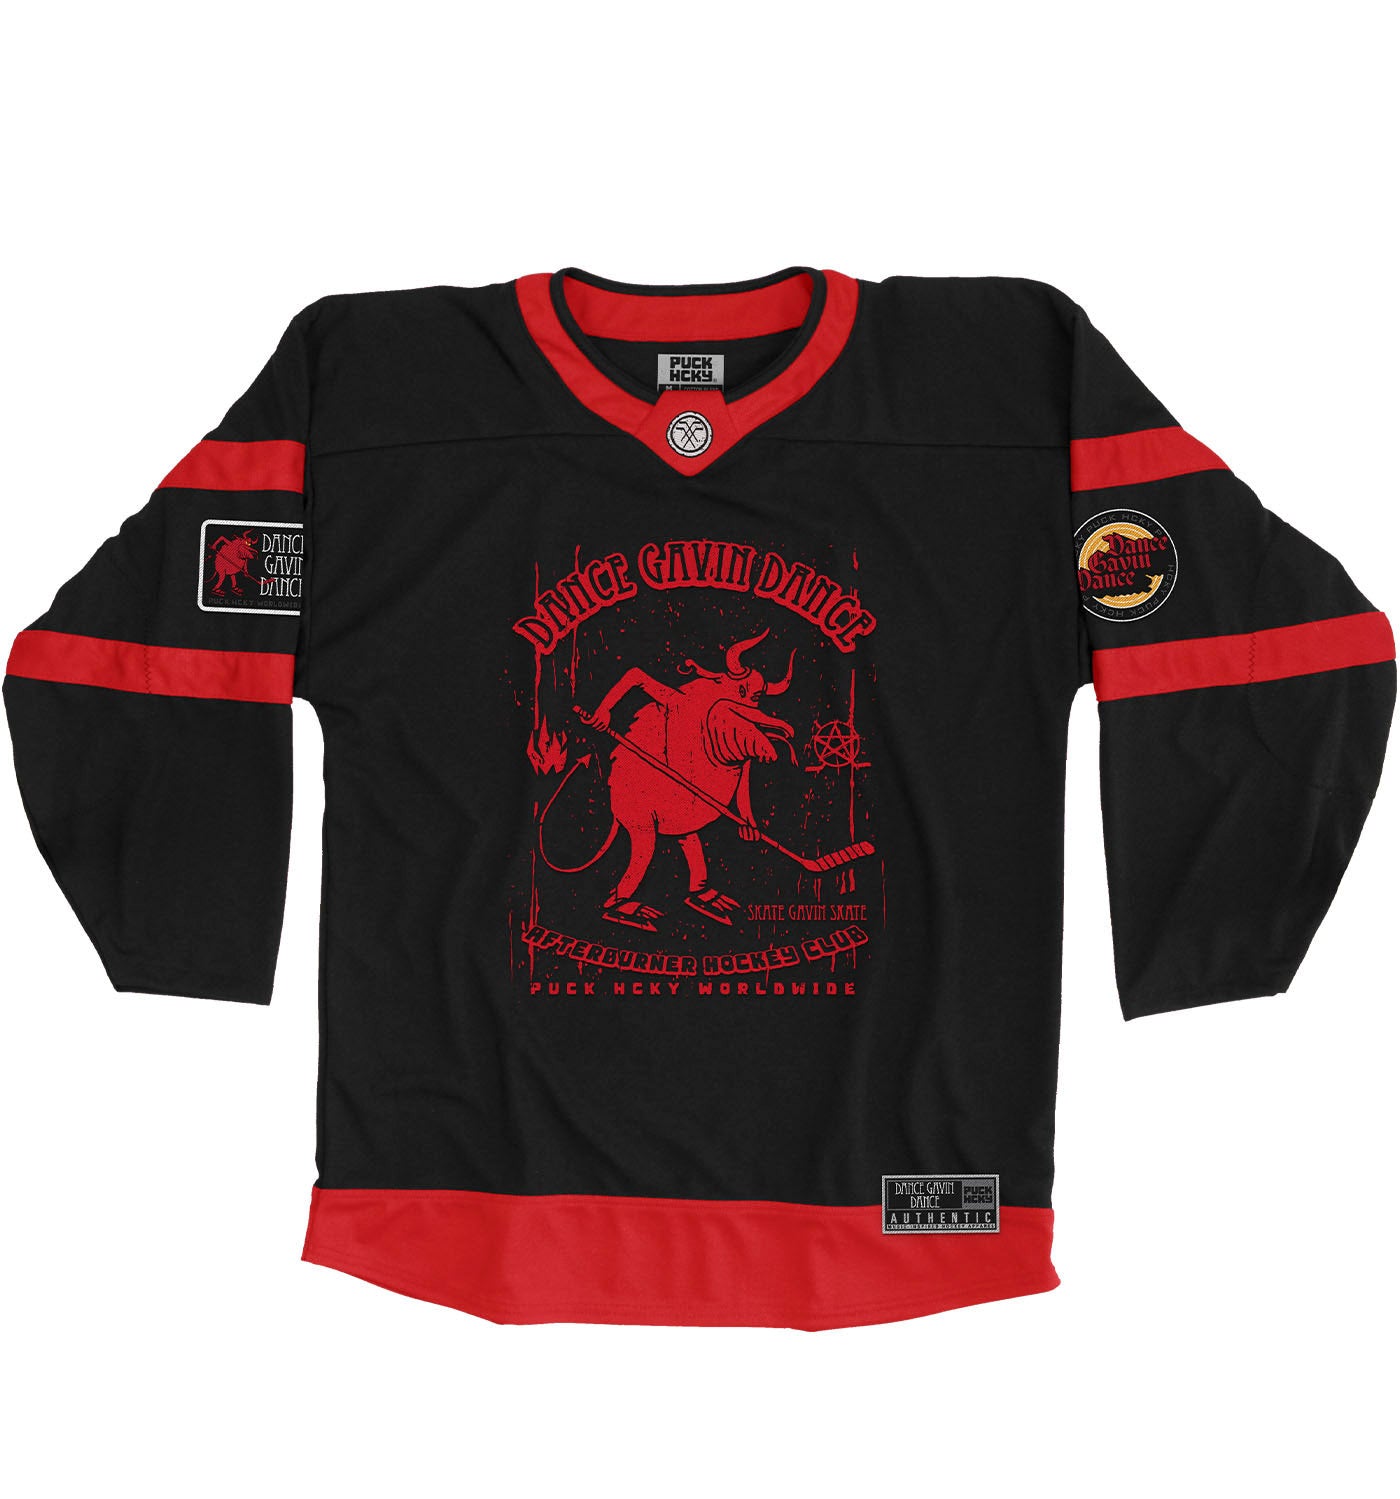 DANCE GAVIN DANCE ‘AFTERBURNER’ hockey jersey in black and red front view